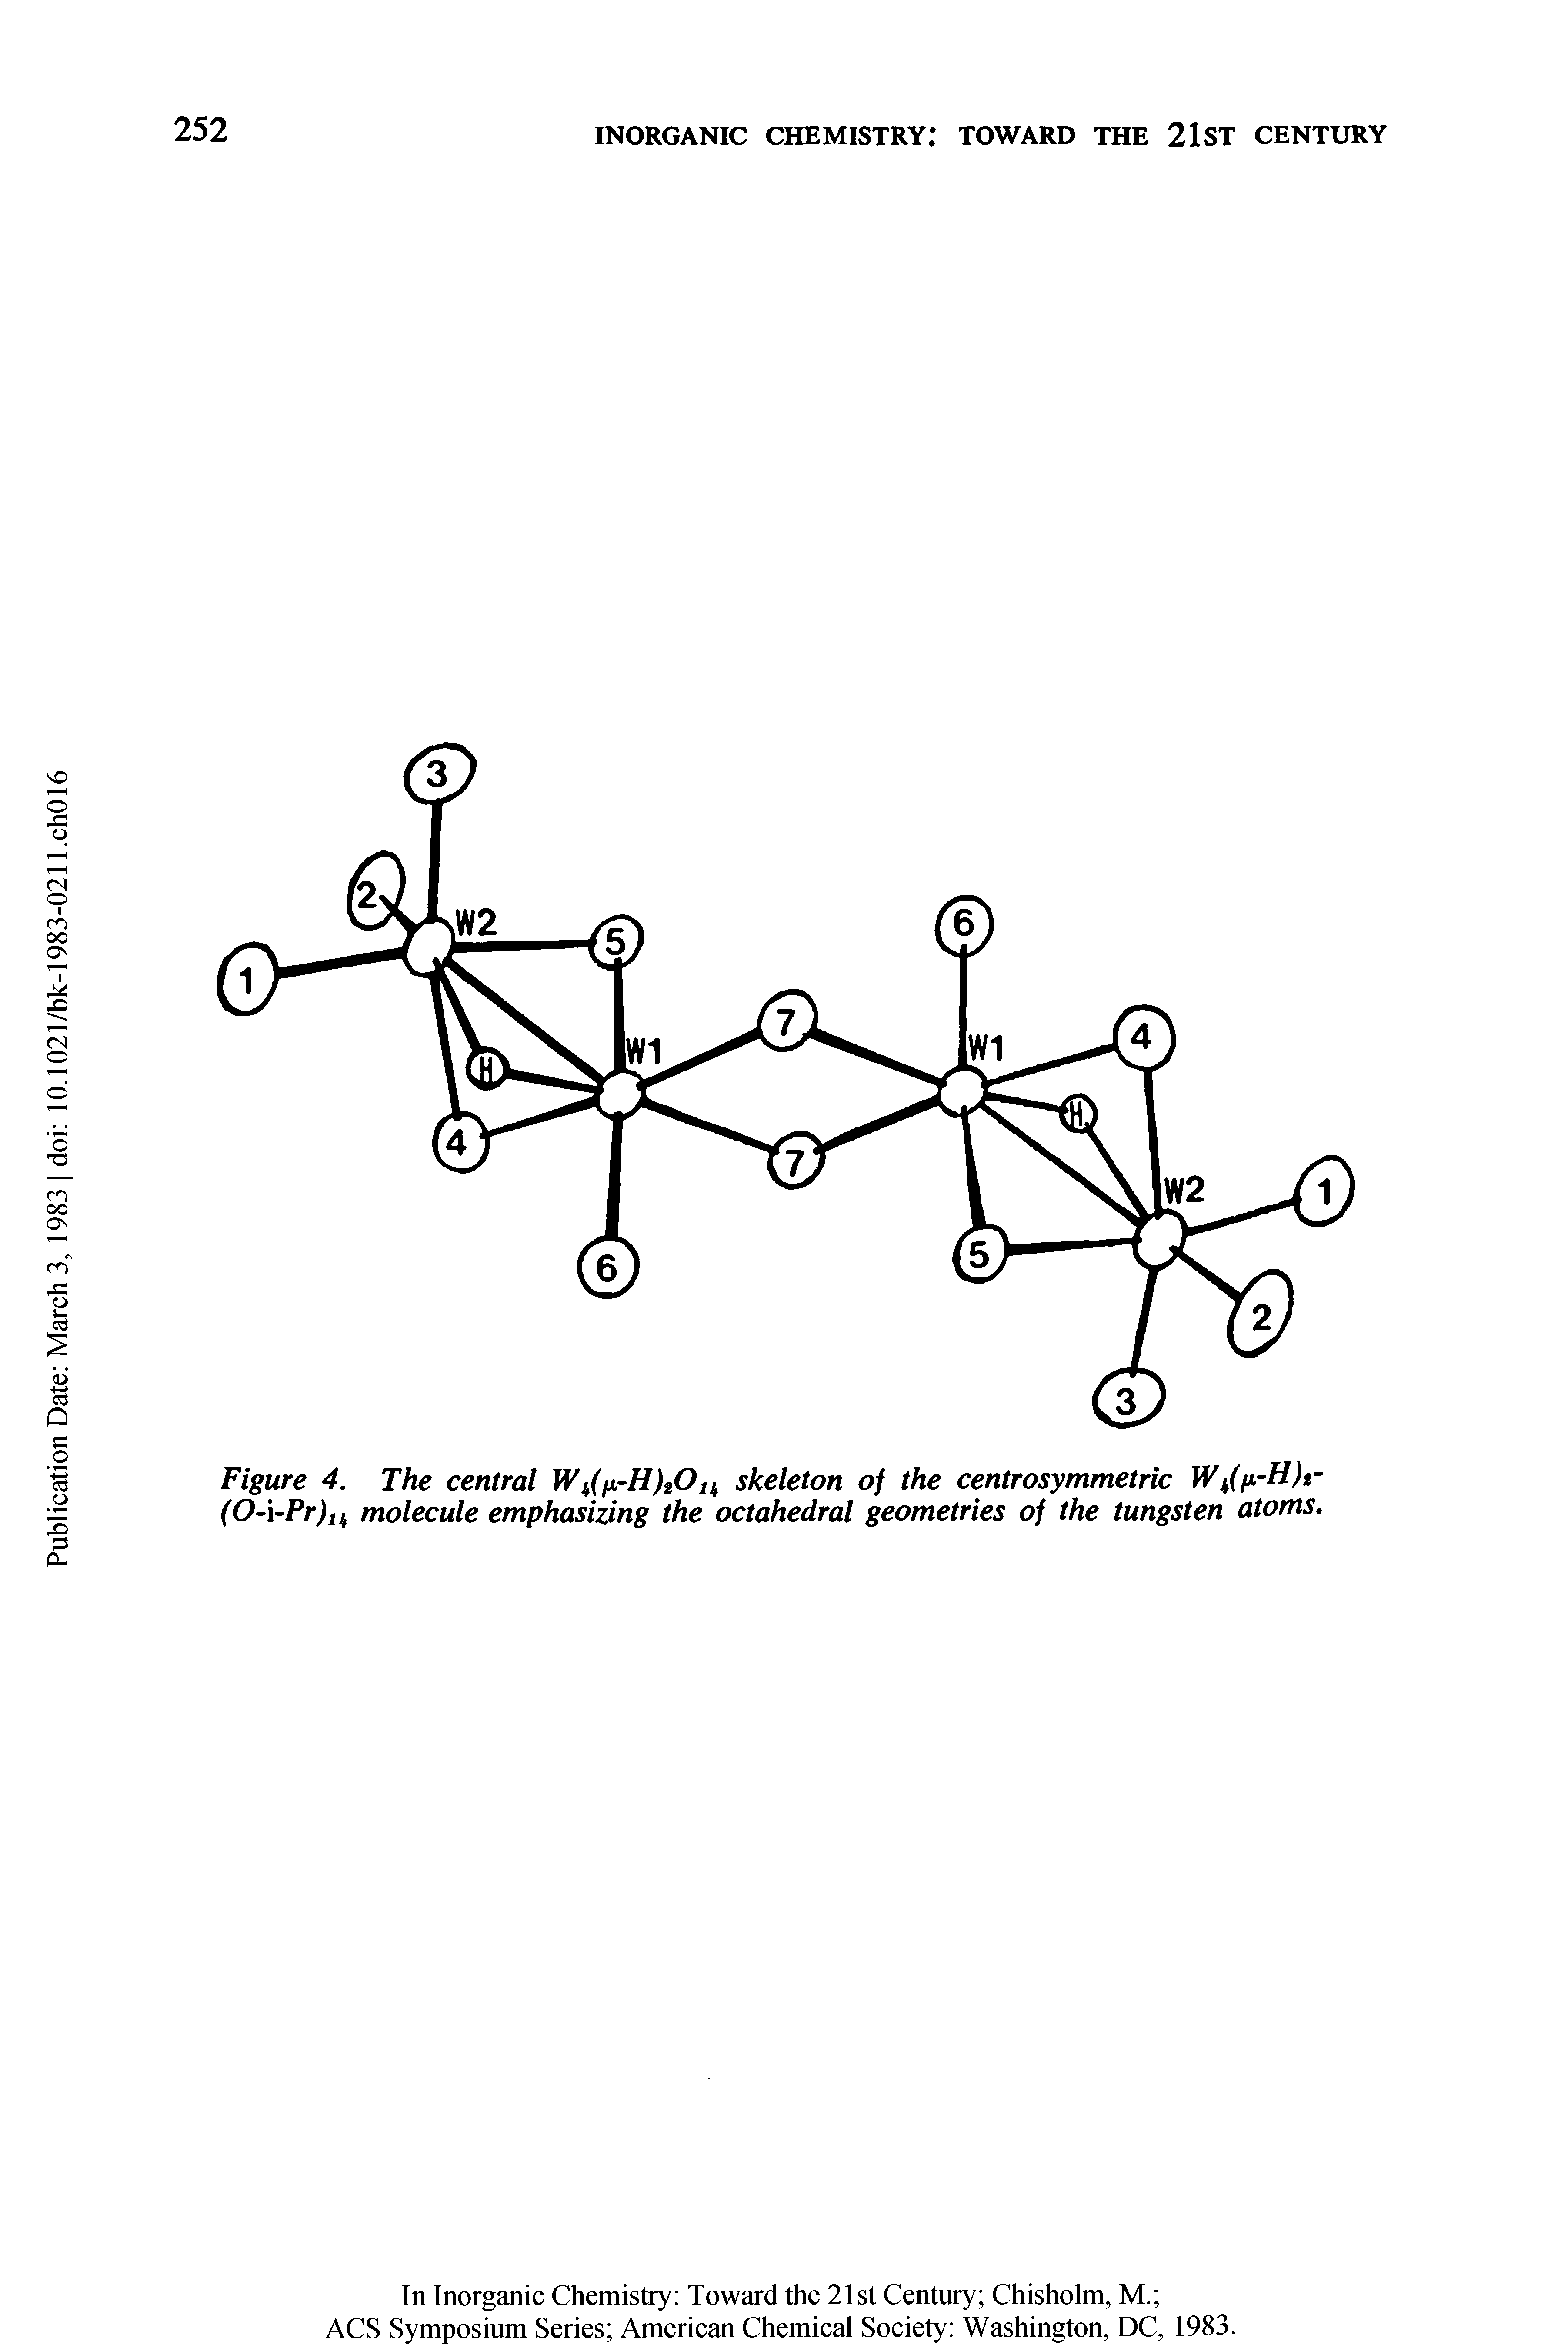 Figure 4. The central Wk(i -H)a0lk skeleton of the centrosymmetric (0- -Pr)H molecule emphasizing the octahedral geometries of the tungsten atoms.